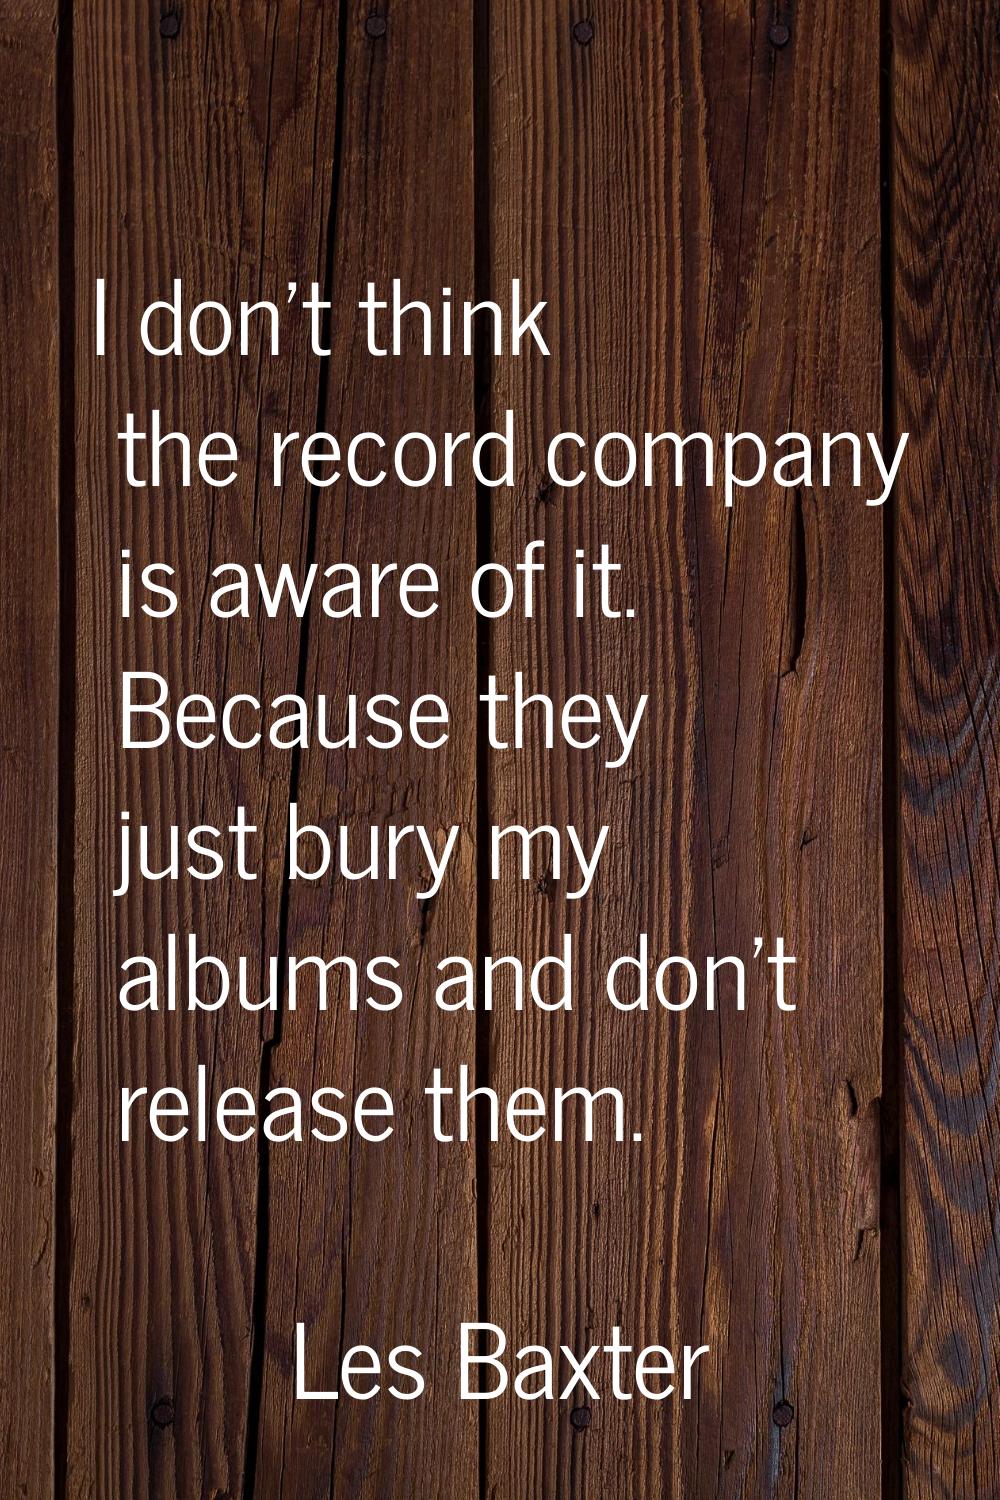 I don't think the record company is aware of it. Because they just bury my albums and don't release